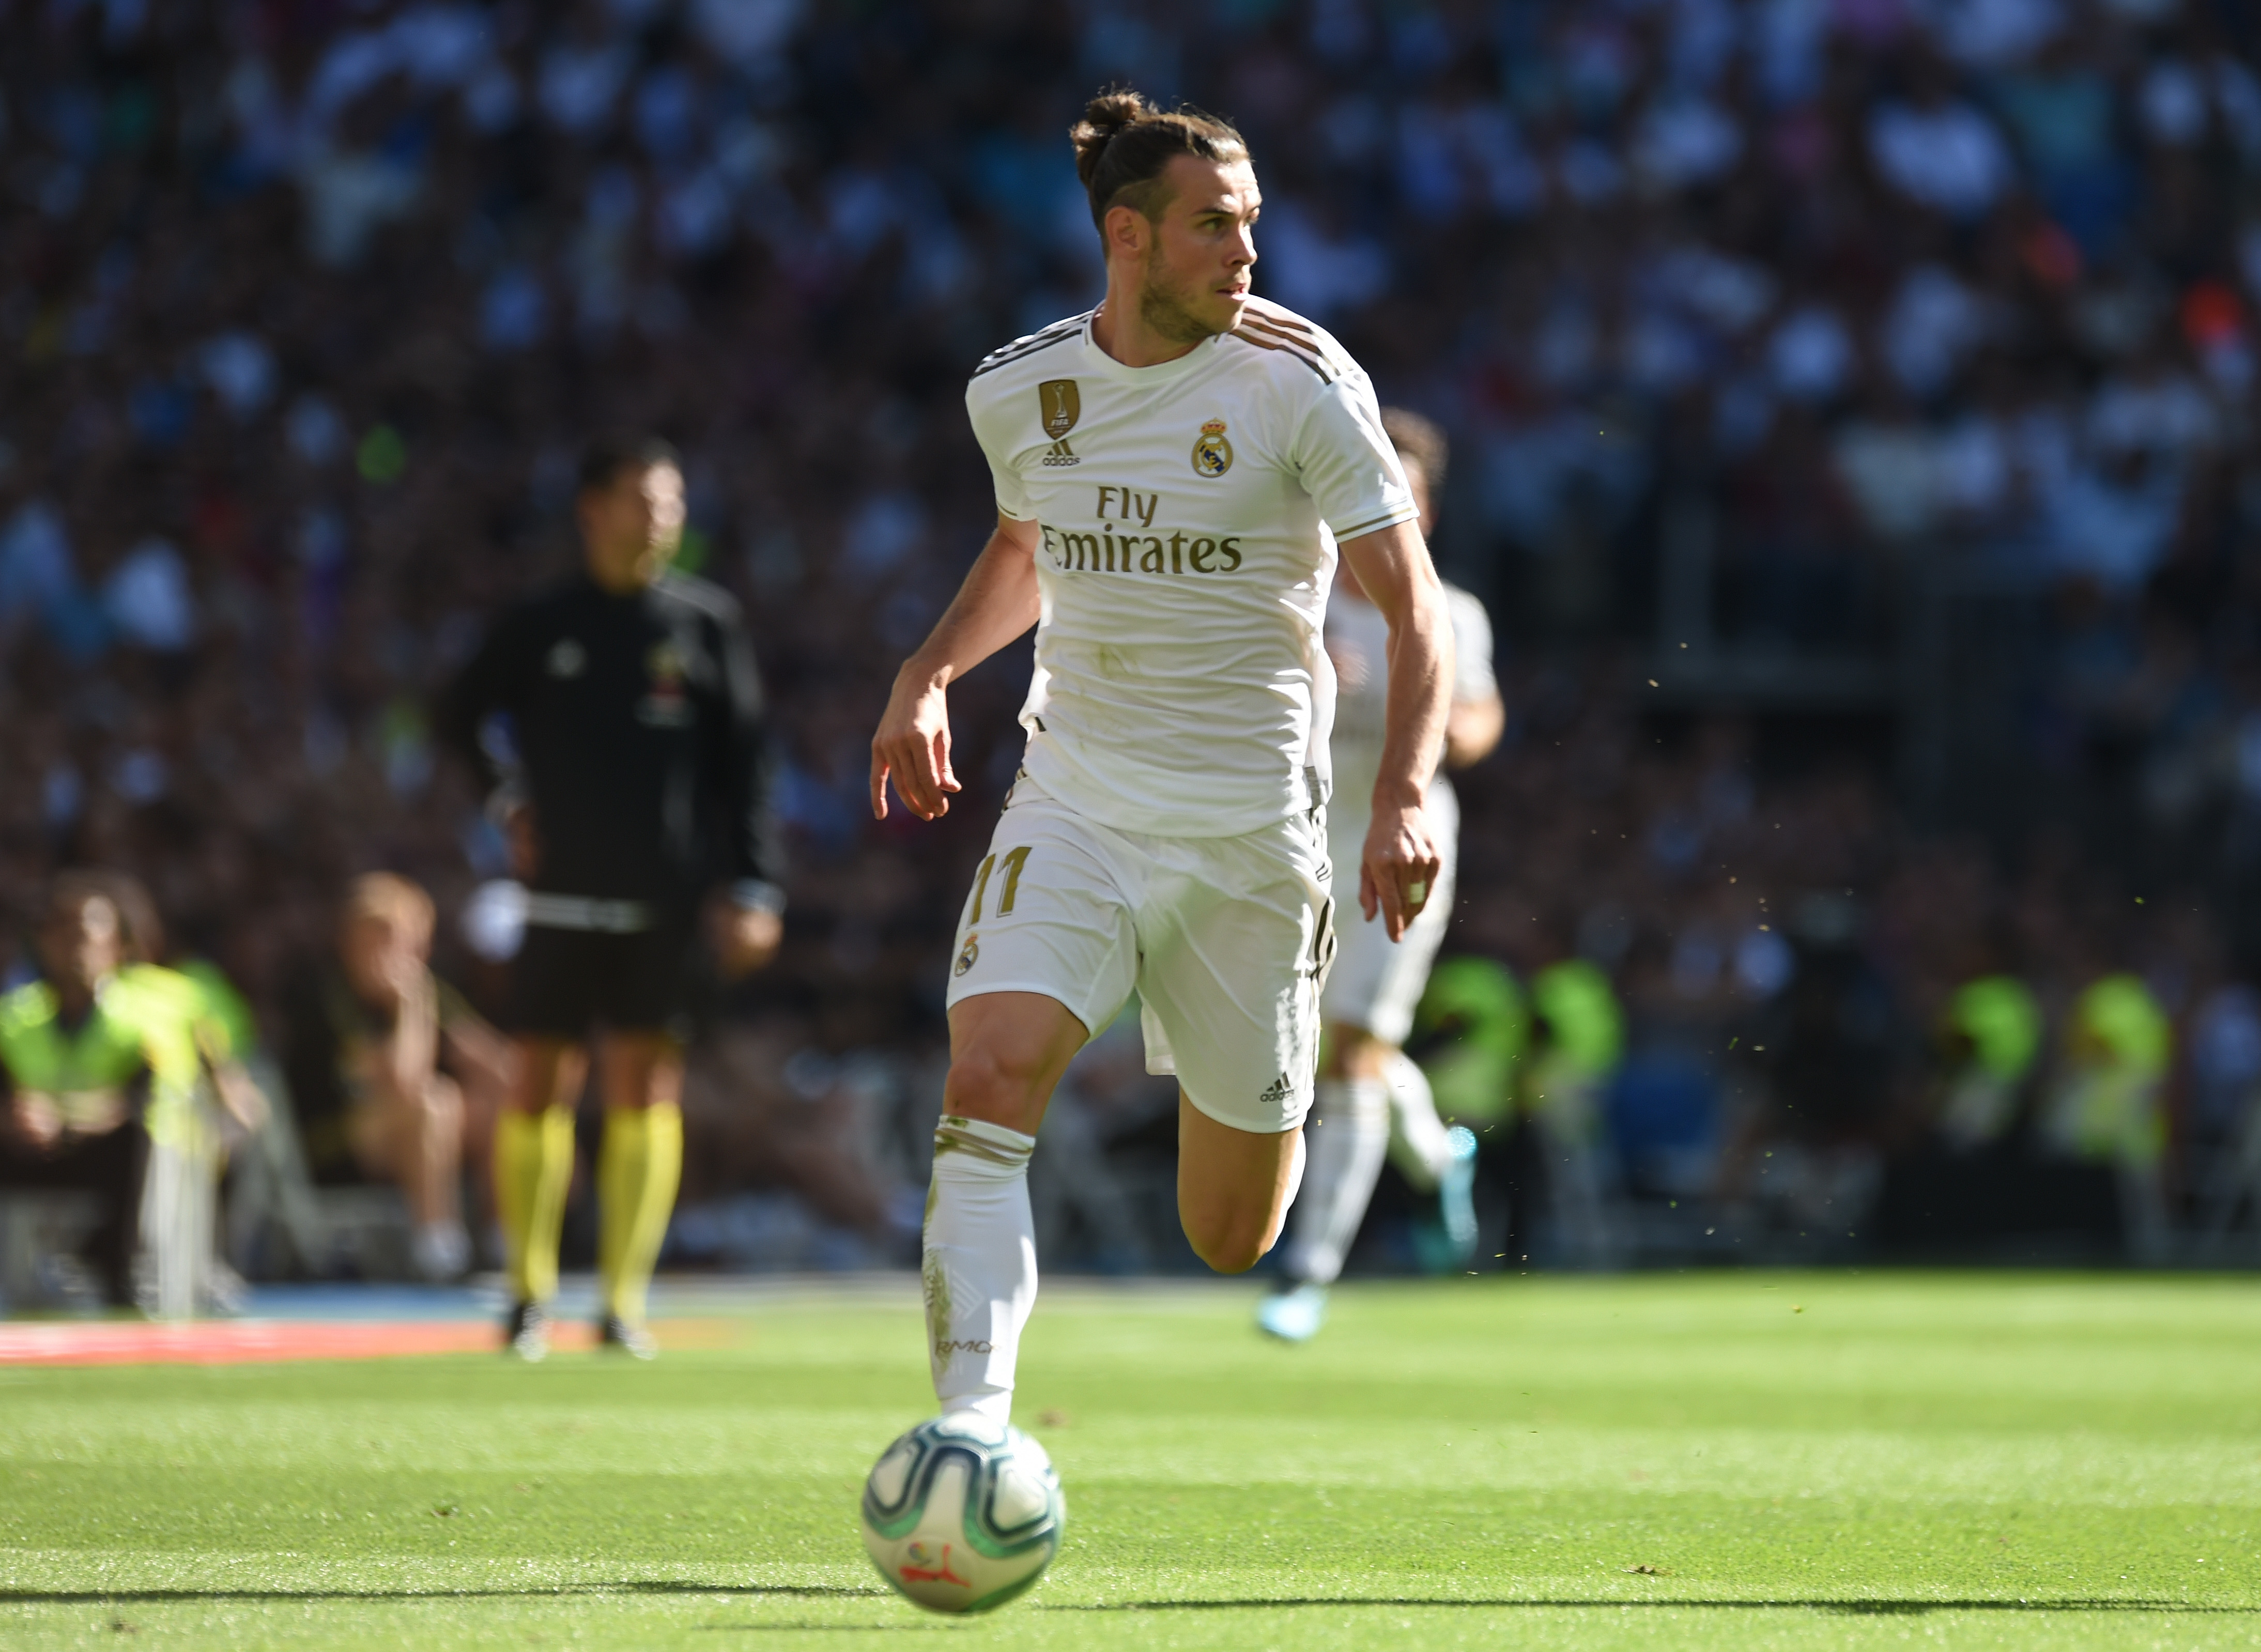 Is Bale's time at Real Madrid at an end? (Photo by Denis Doyle/Getty Images)